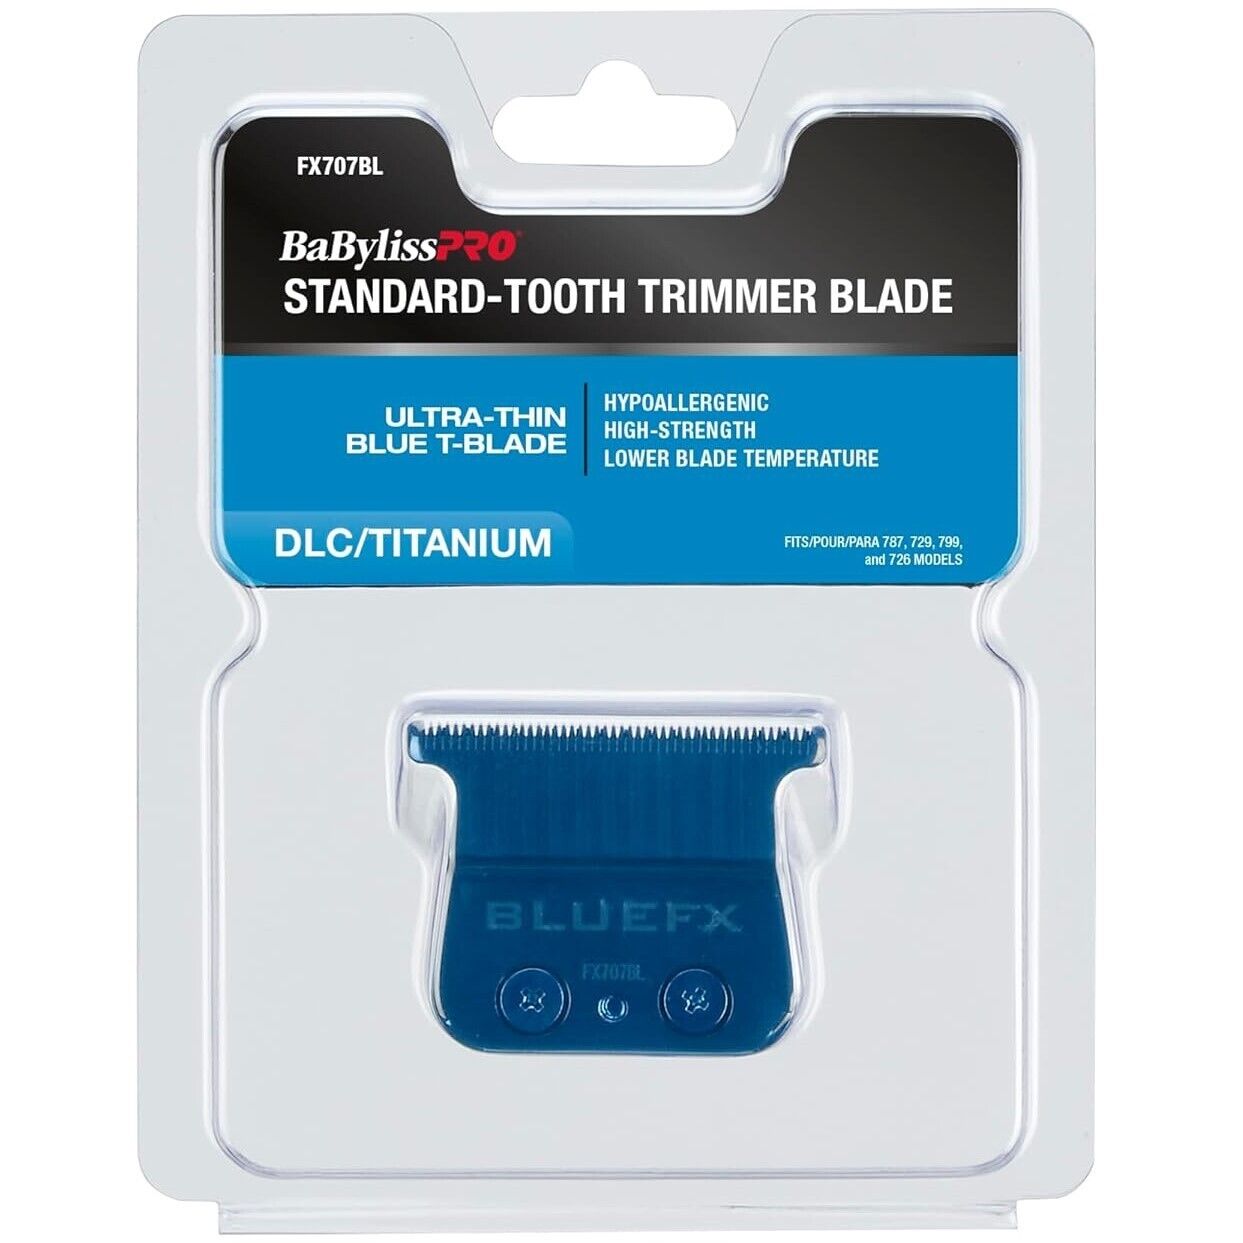 BaByliss FX707 Replacement Trimmer Blades